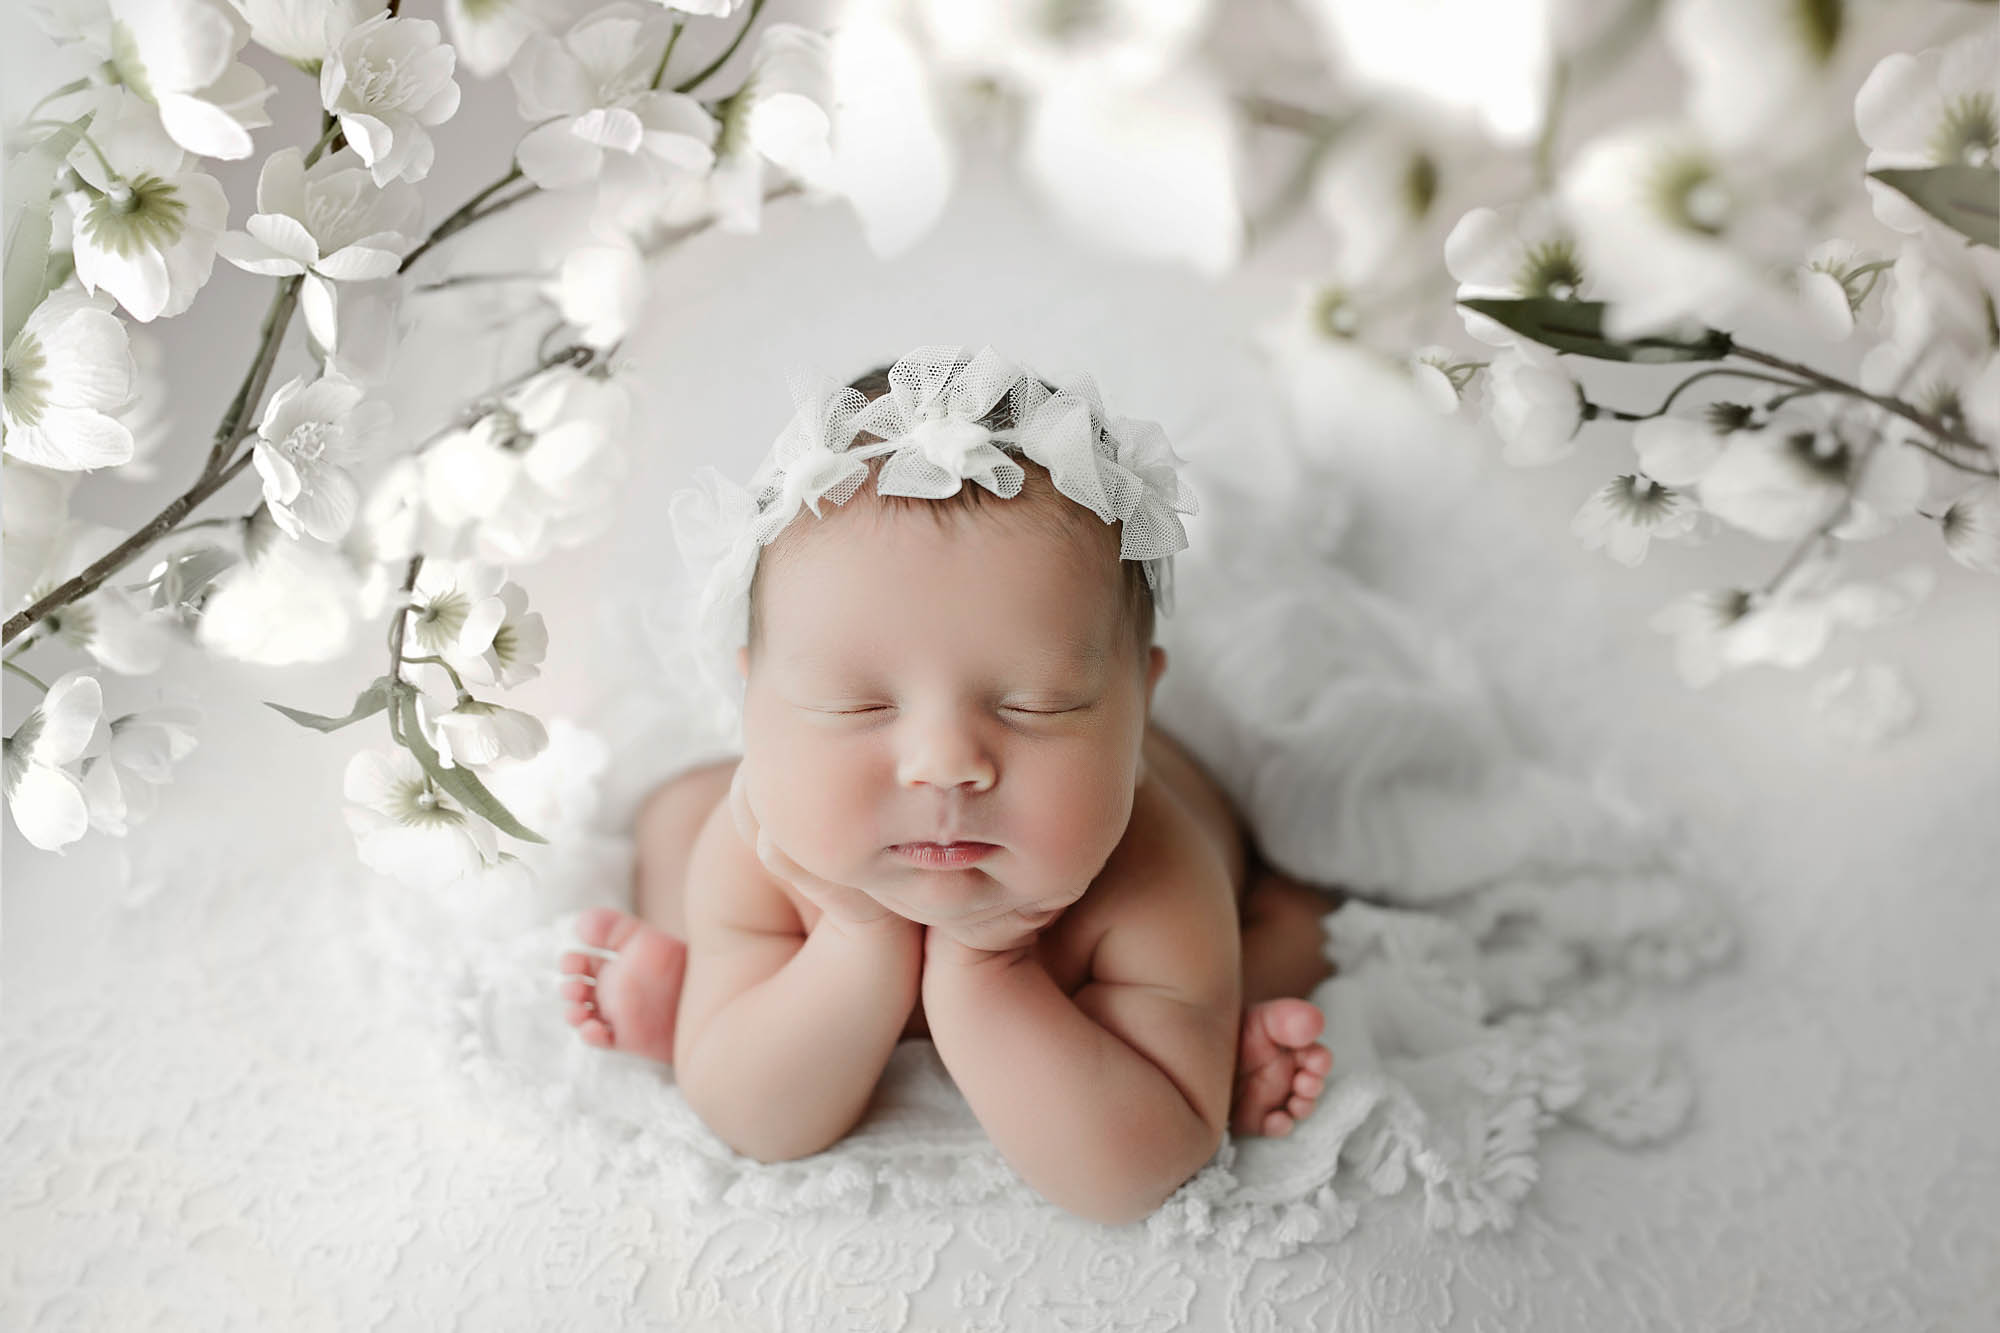 Canton Newborn Photographer image of newborn baby girl wearing a white floral headband with white flowers behind her laying on a white blanket with her hands holding her head